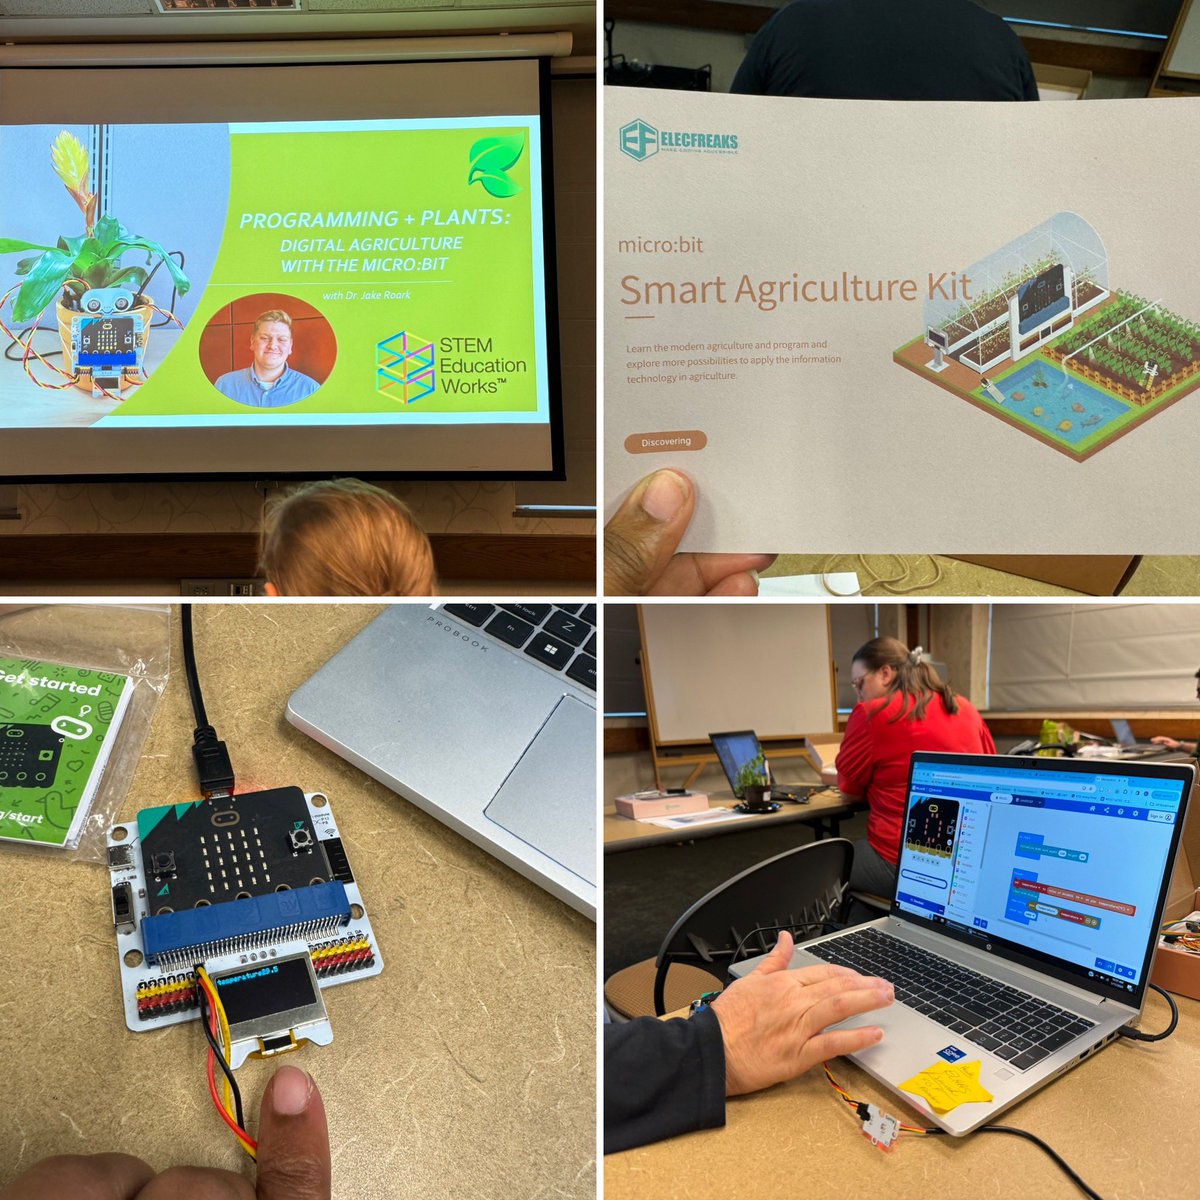 Our students are about to embrace the future of agriculture- Agro robotics!!! #thisishoweSTEM #engineeringthefuture #programmingwithplants @PurdueSTEM